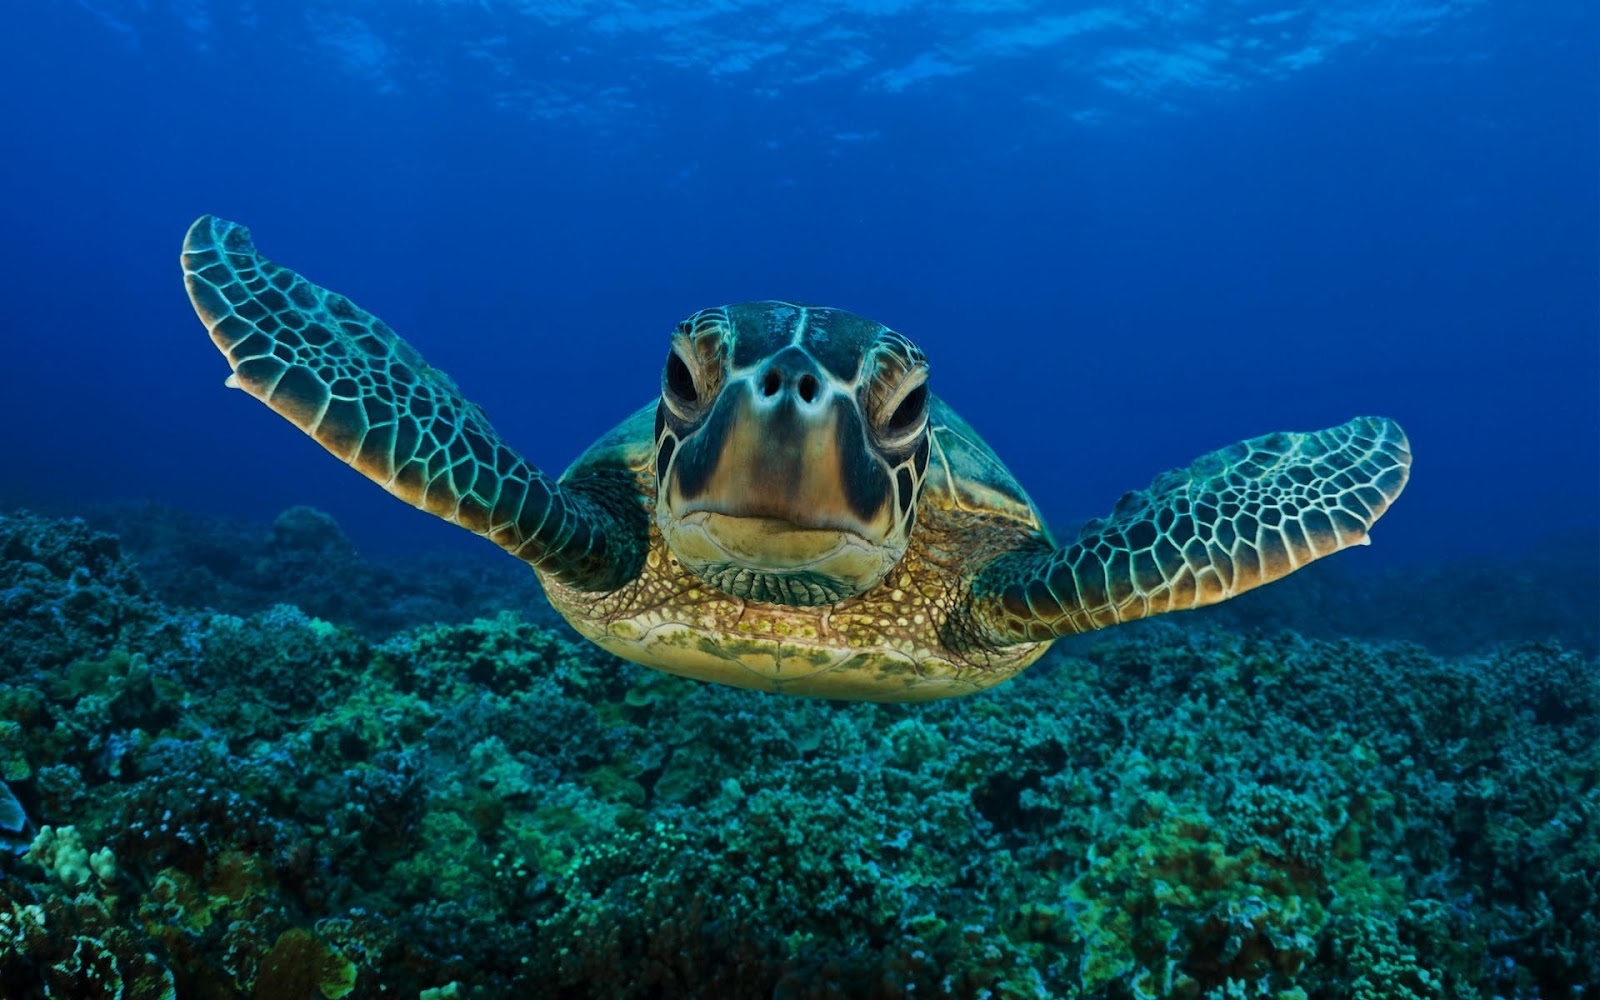 HD Turtle Wallpaper With A Swimming Underwater Turtles